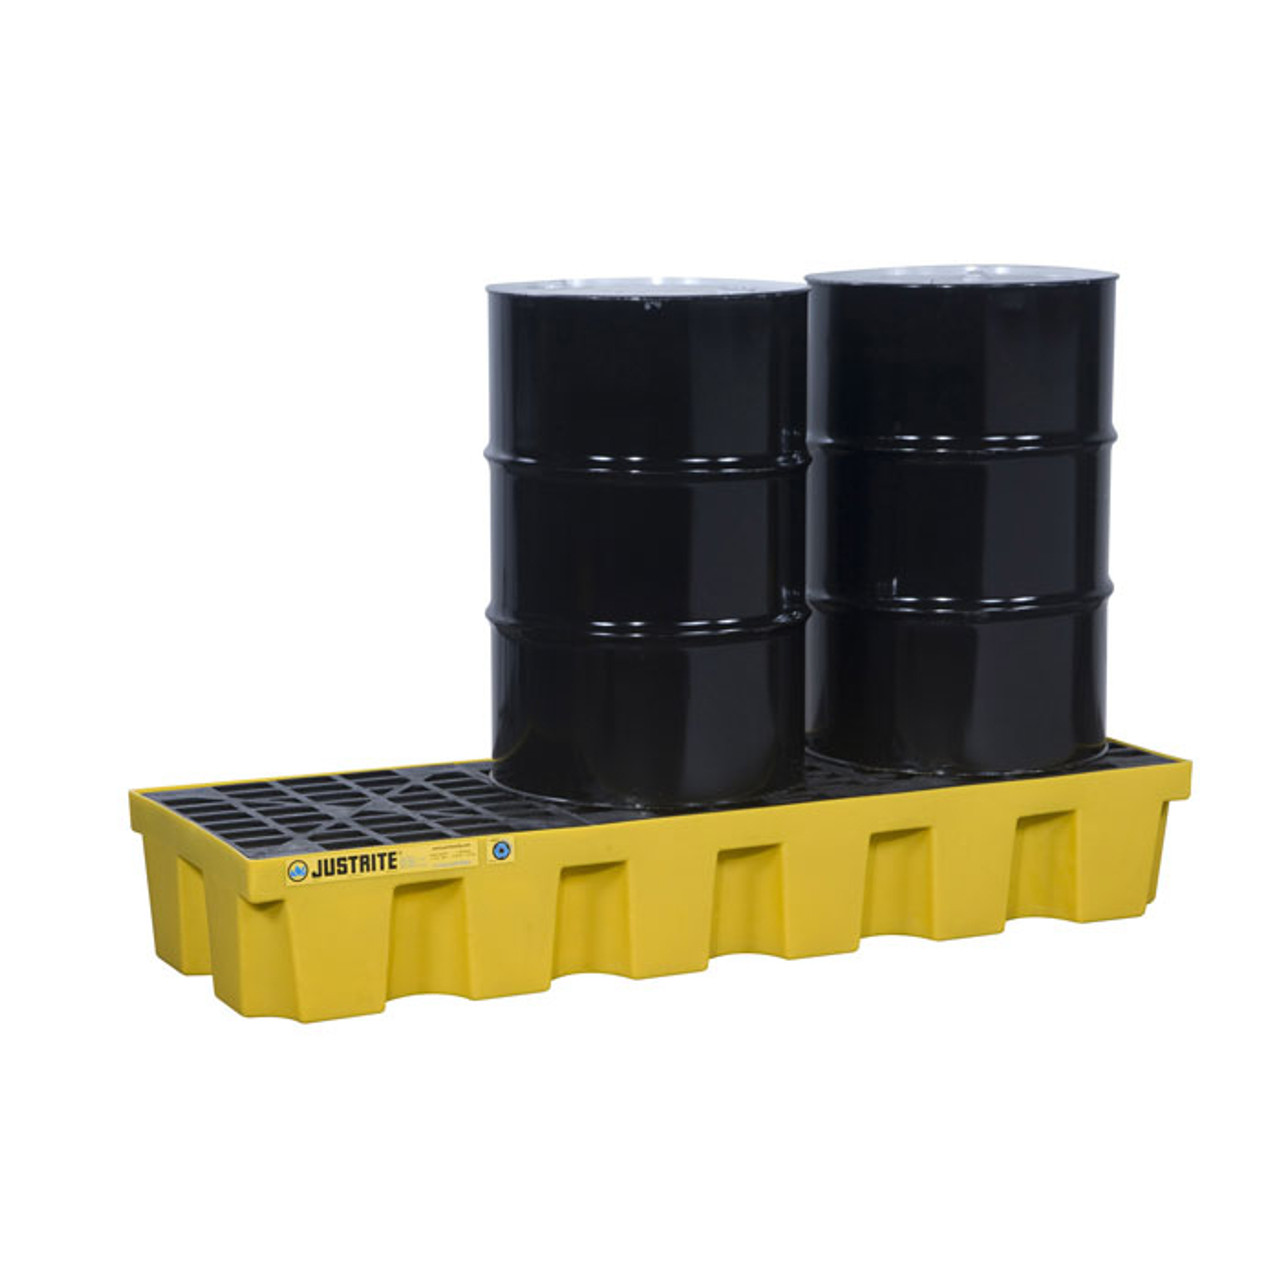 Justrite® EcoPolyBlend Spill Control Pallet With Drain, 3 Drum, Recycled Polyethylene, Yellow